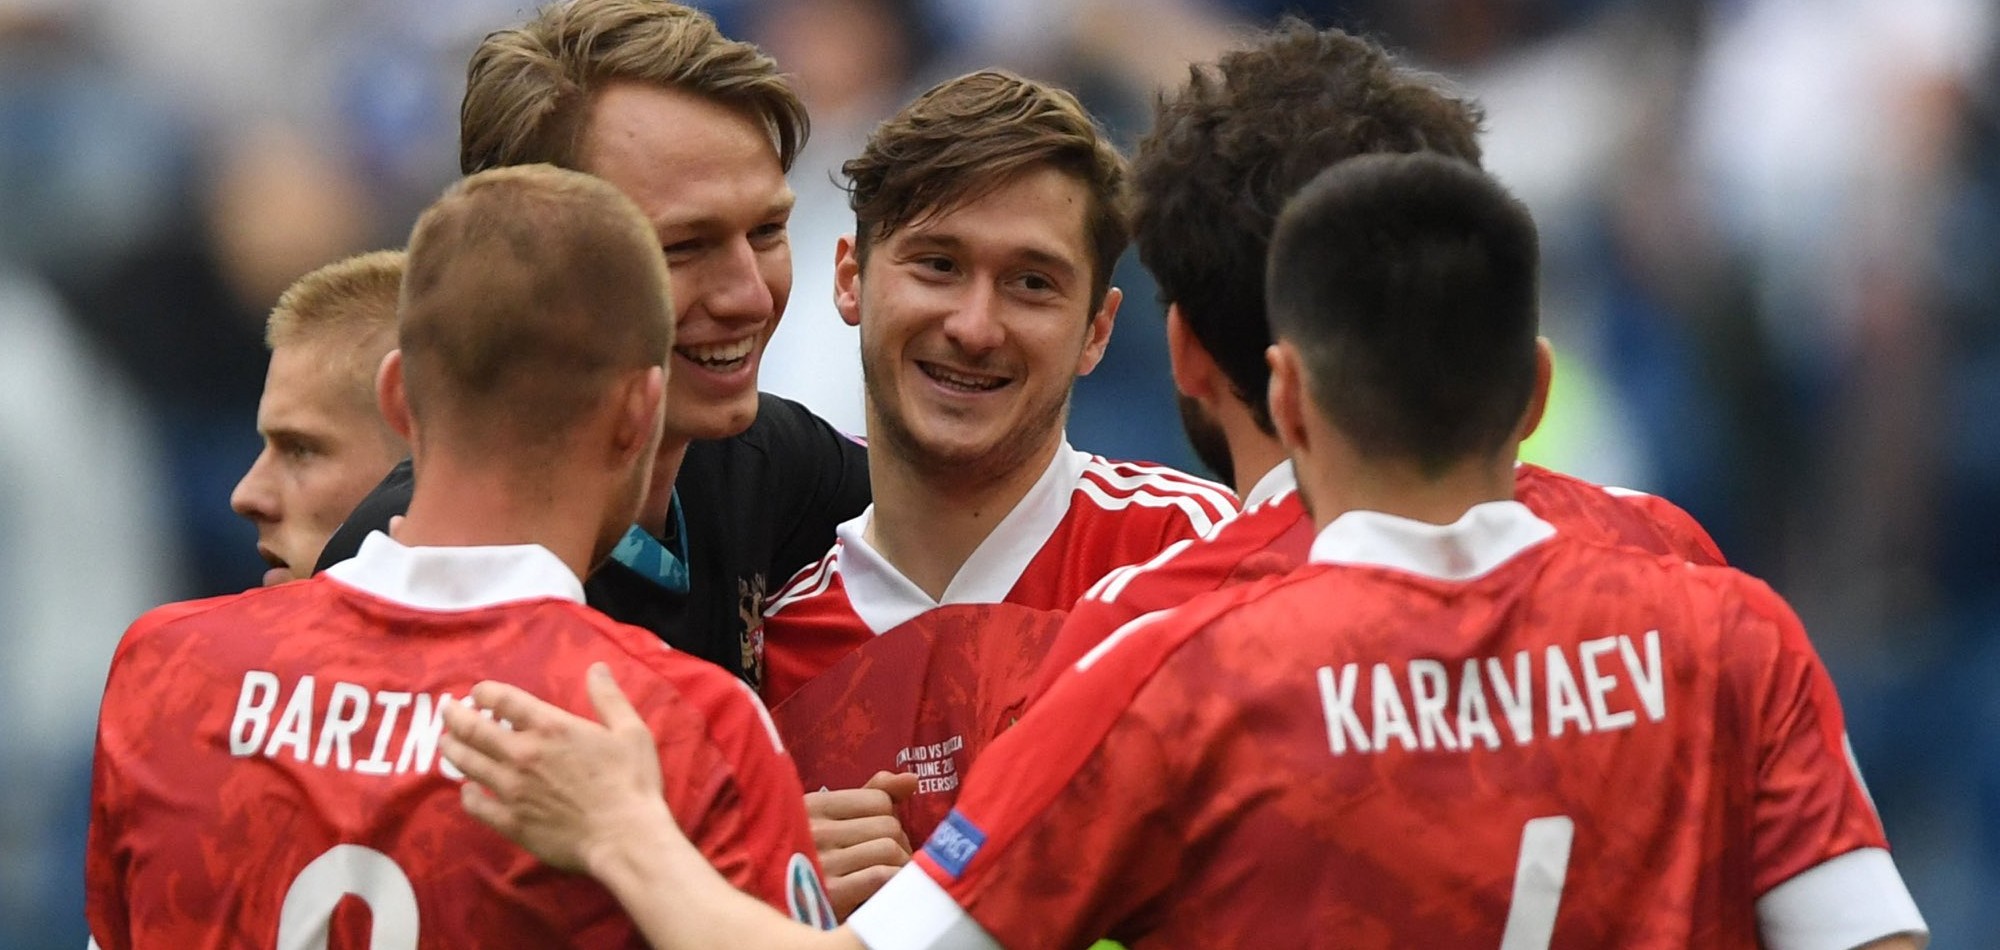 Russia back on track with 1-0 win over Finland at Euro 2020